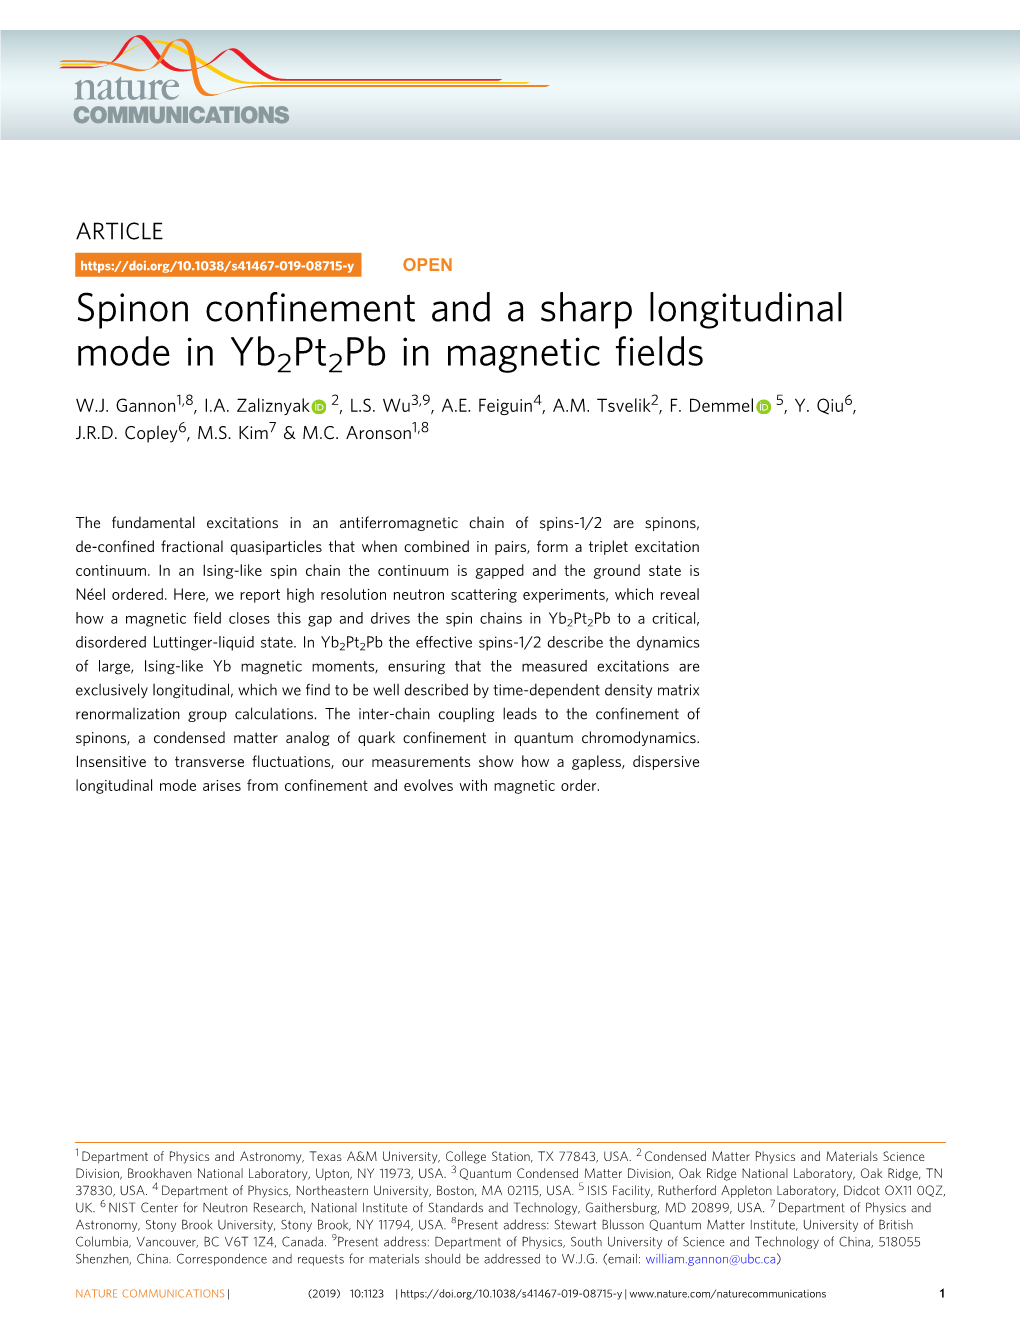 Spinon Confinement and a Sharp Longitudinal Mode in Yb2pt2pb In